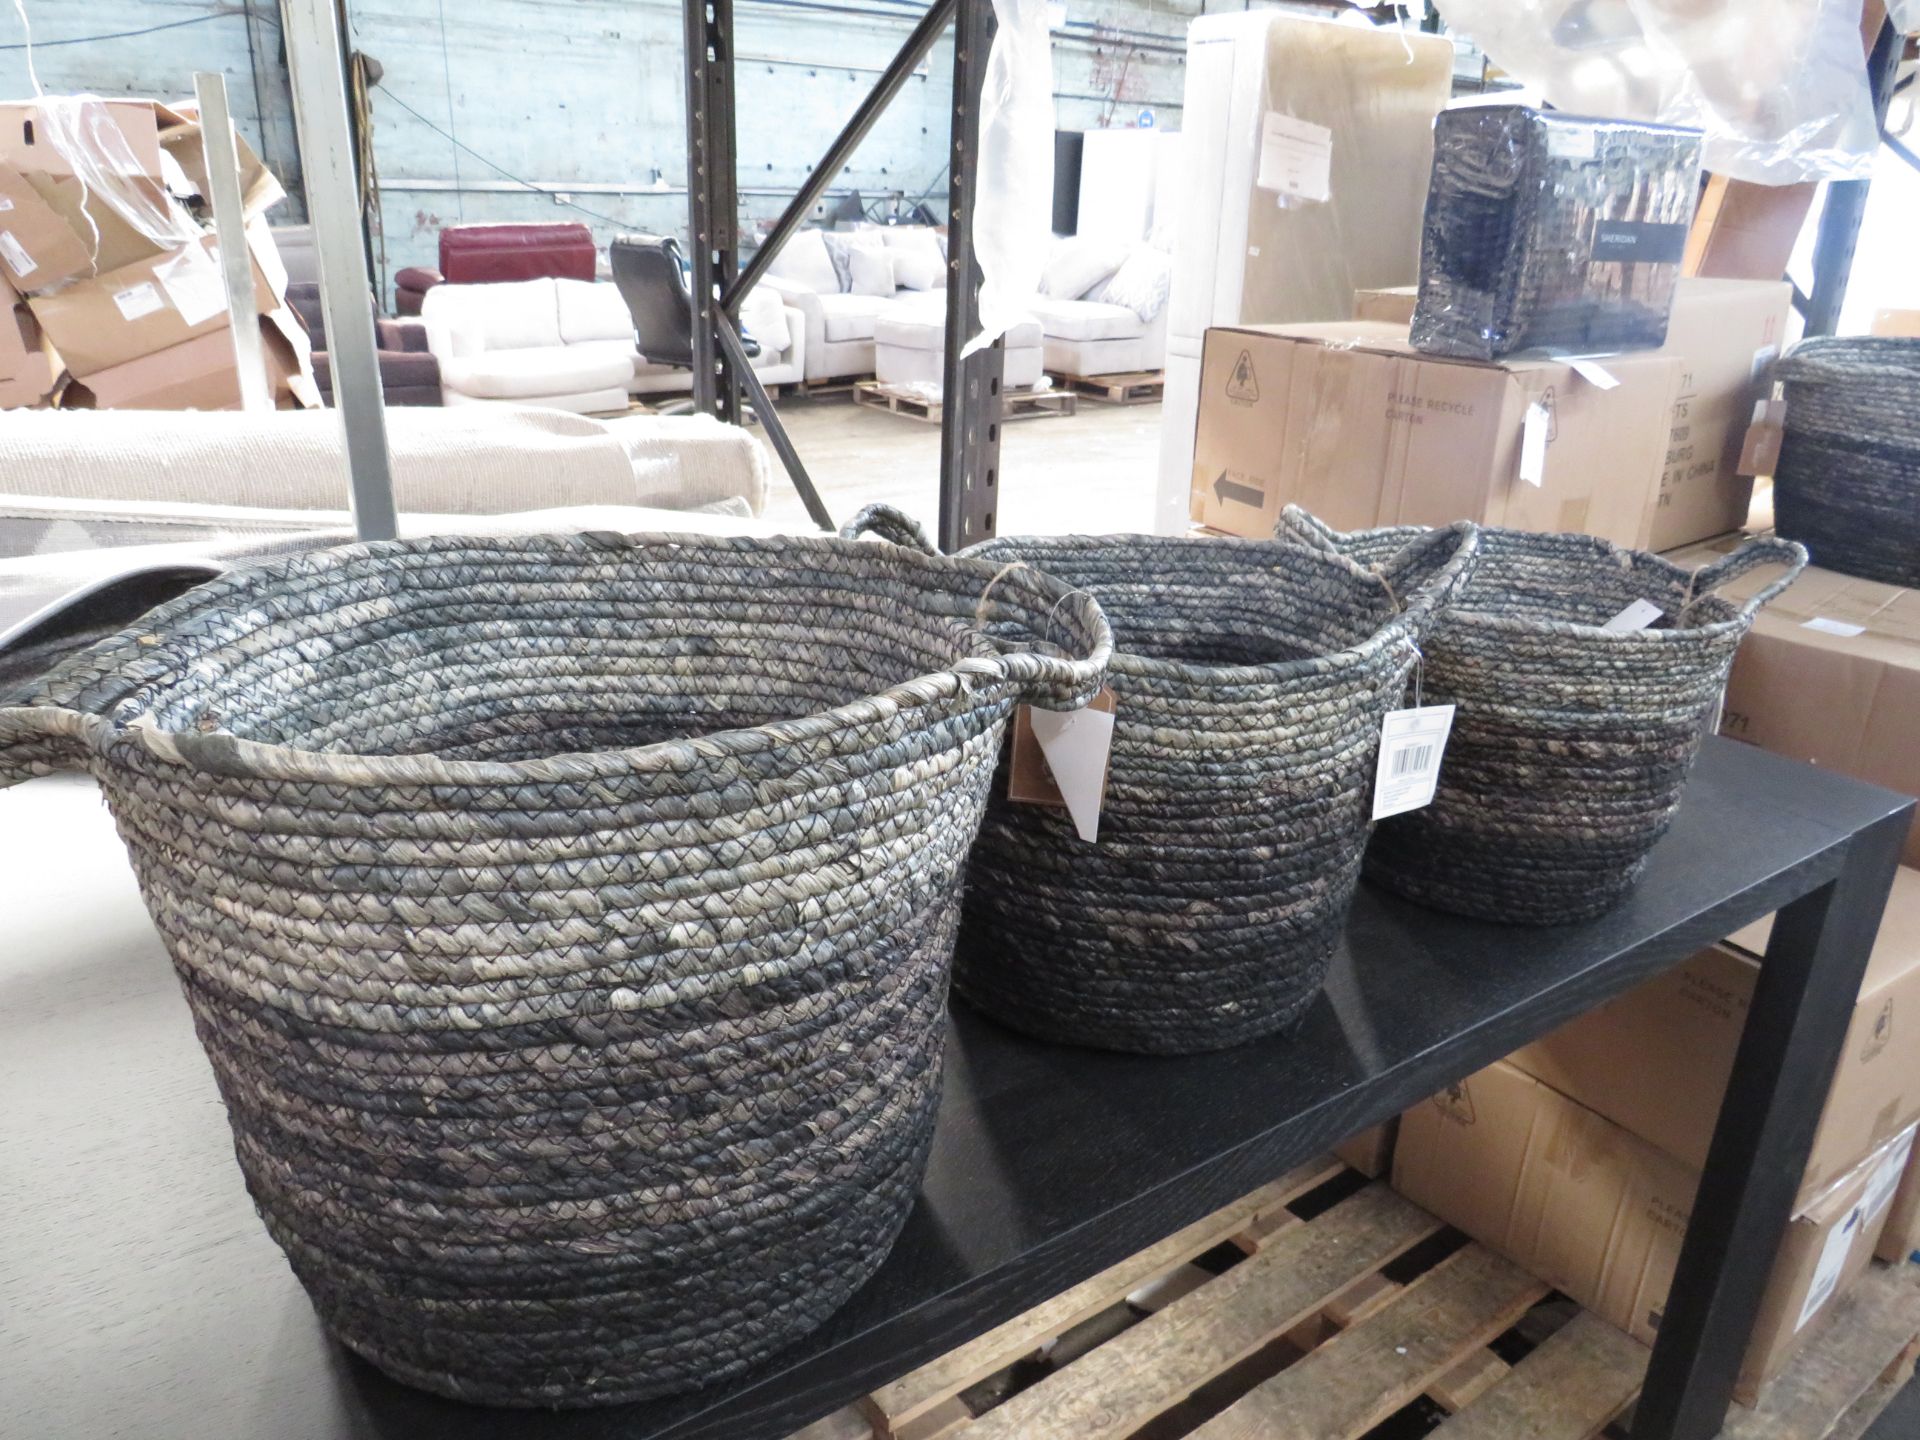 Cox & Cox Black Ombre Storage Baskets RRP Â£95.00Crafted from cornleaf for a natural, lightweight